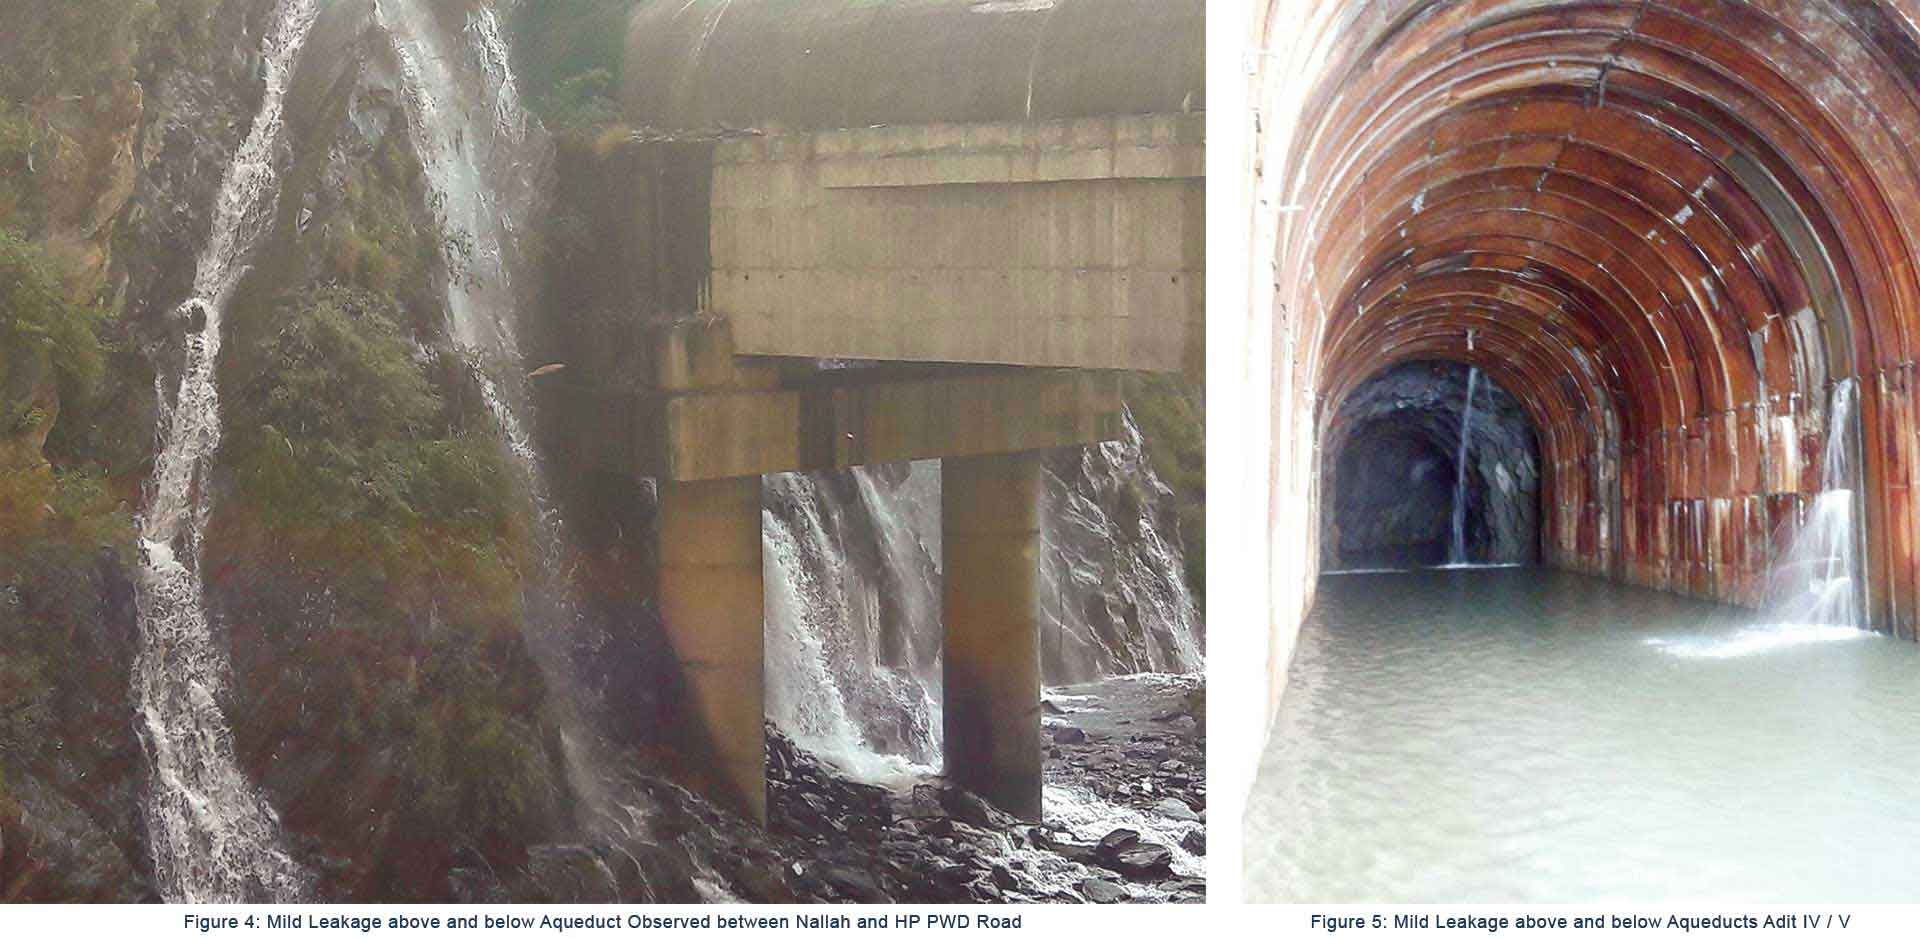 Mild Leakage above and below Aqueduct Observed between Nallah and HP PWD Road